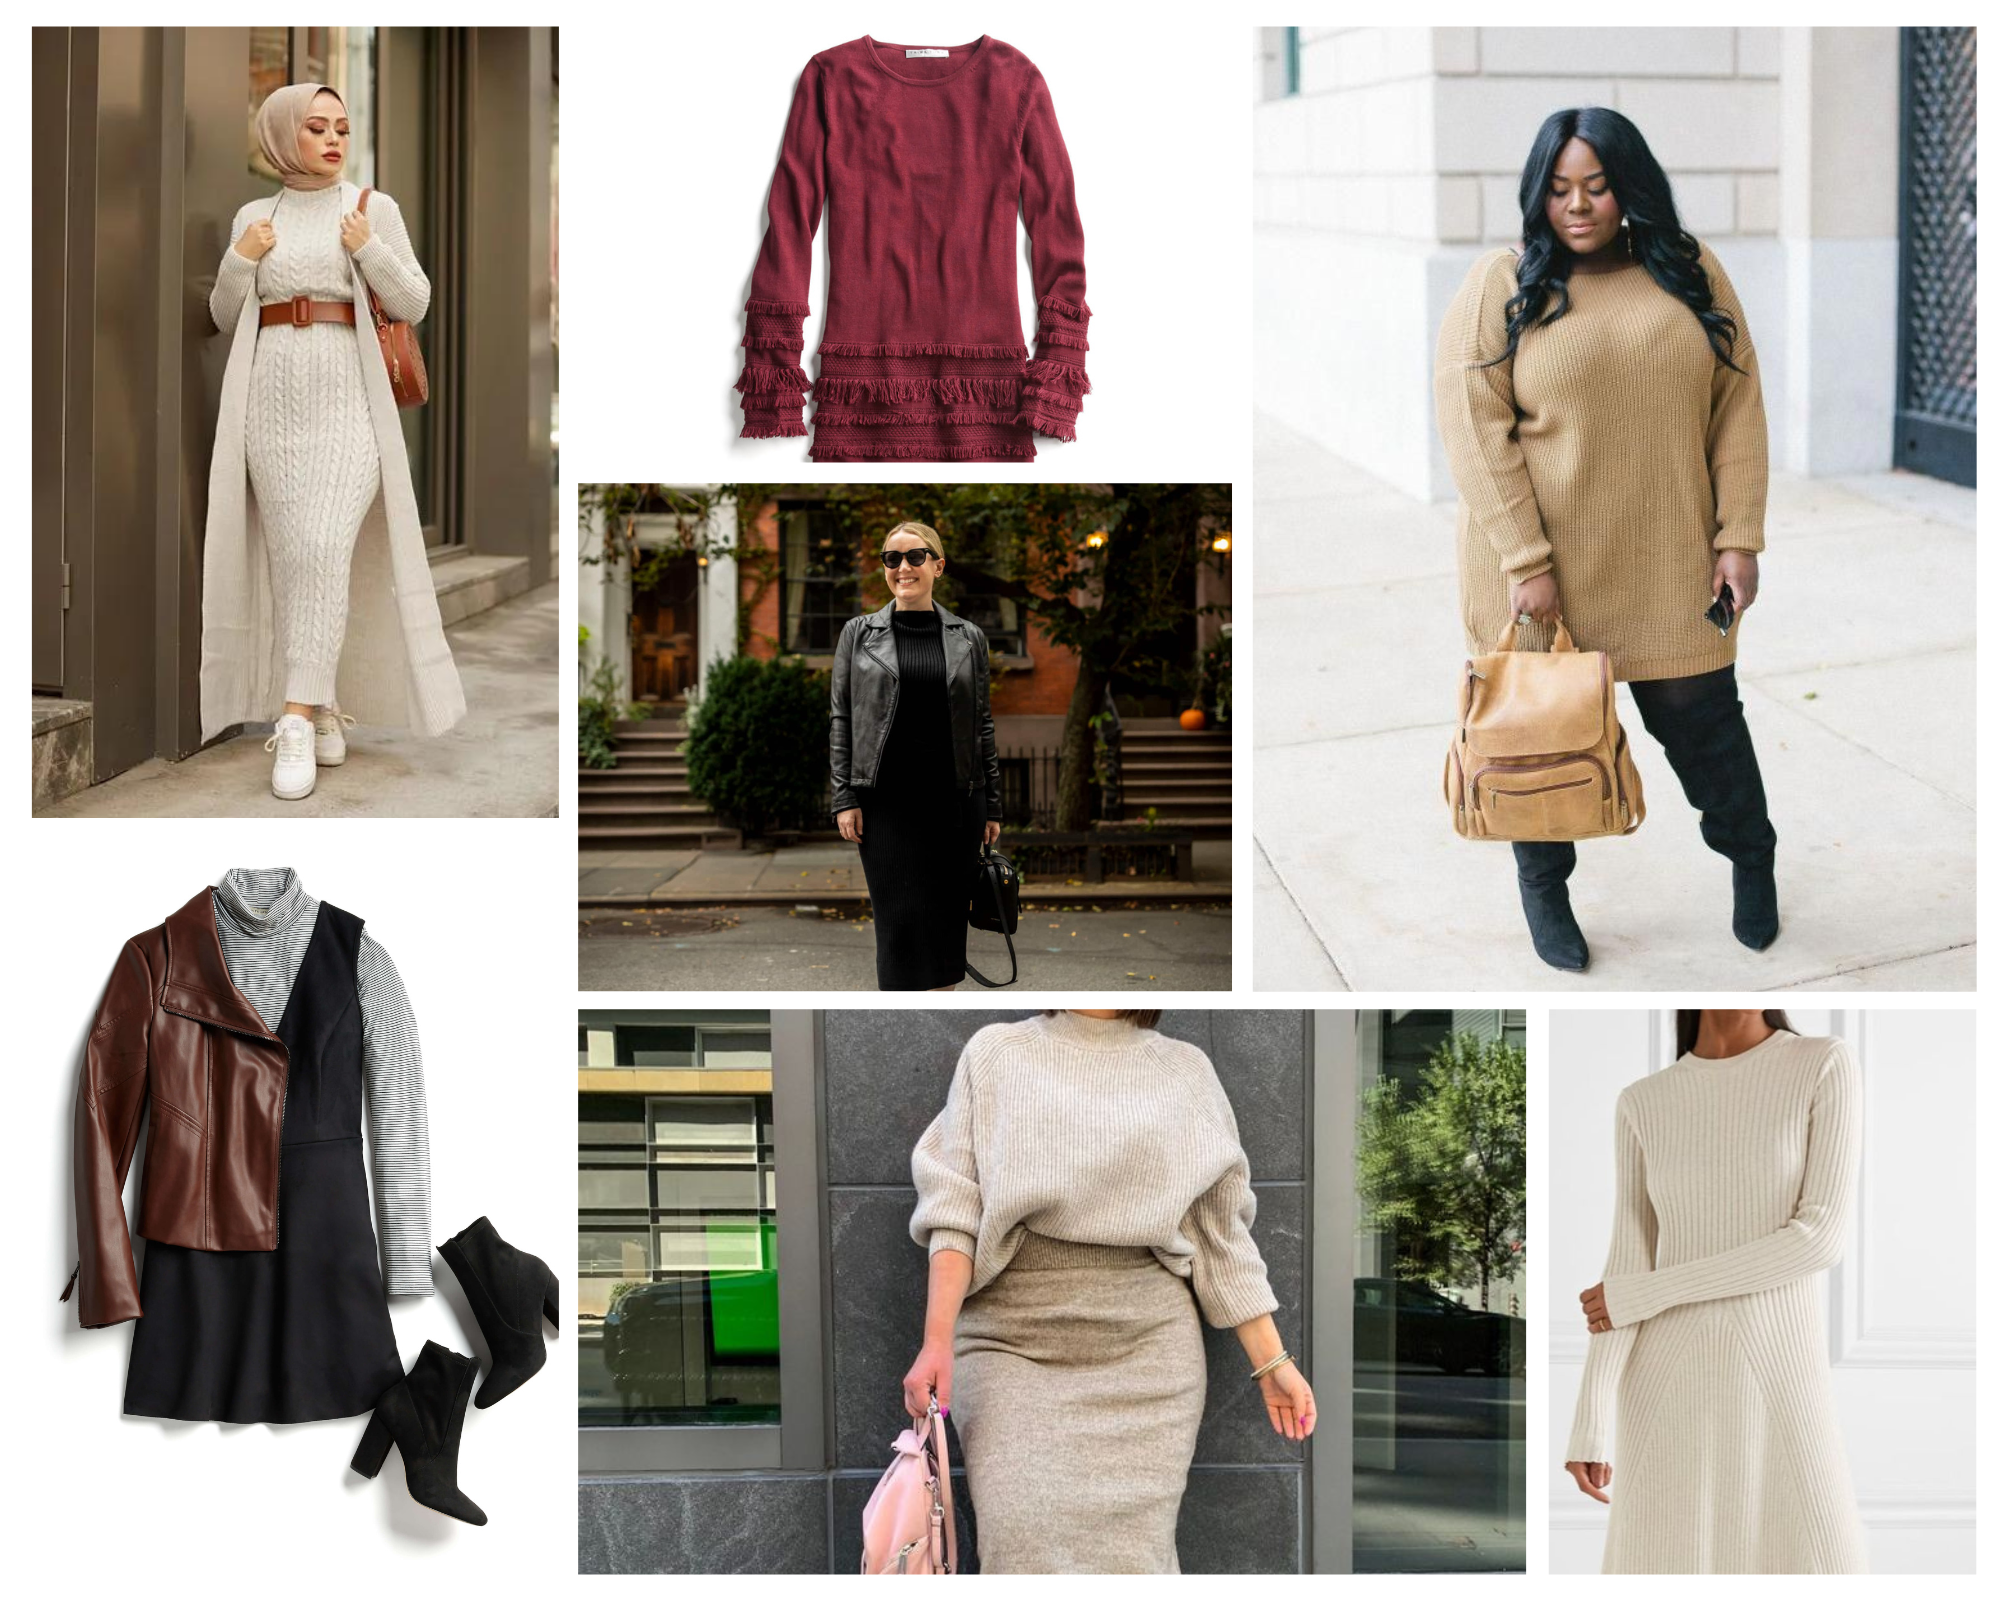 Top tips for wearing dresses in cold weather – Threadicated